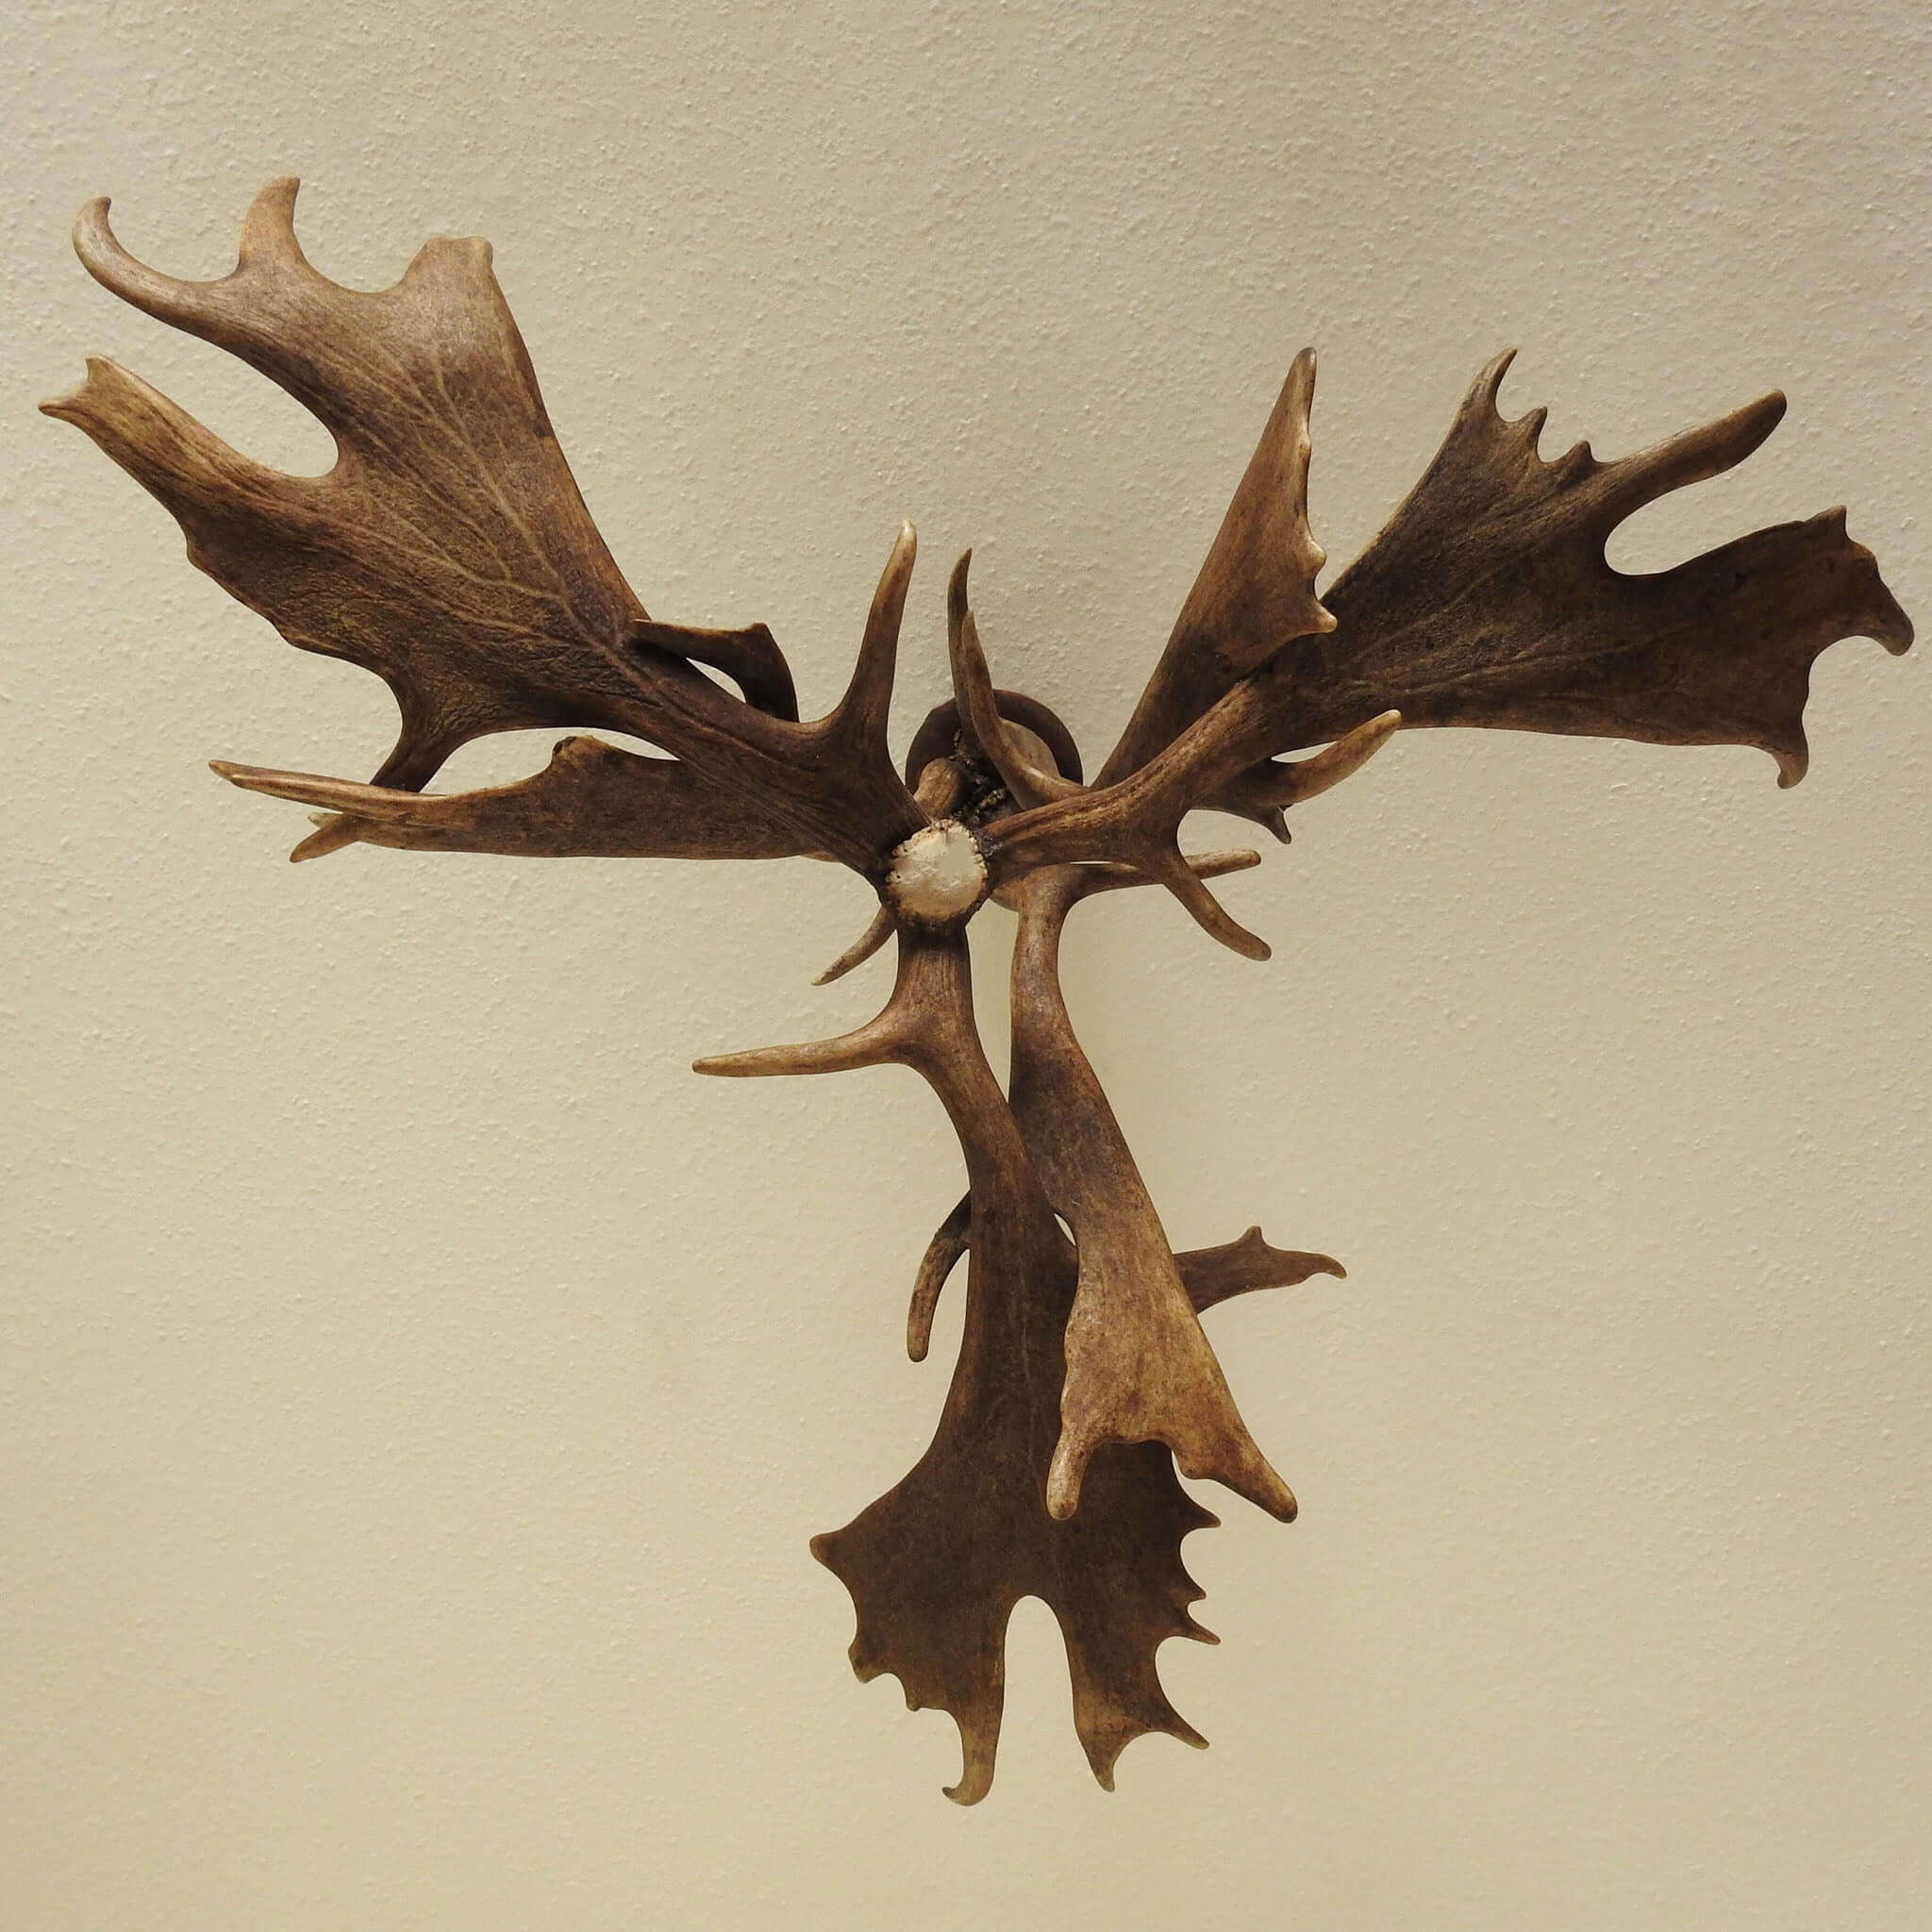 Real antler chandelier, view from the bottom.